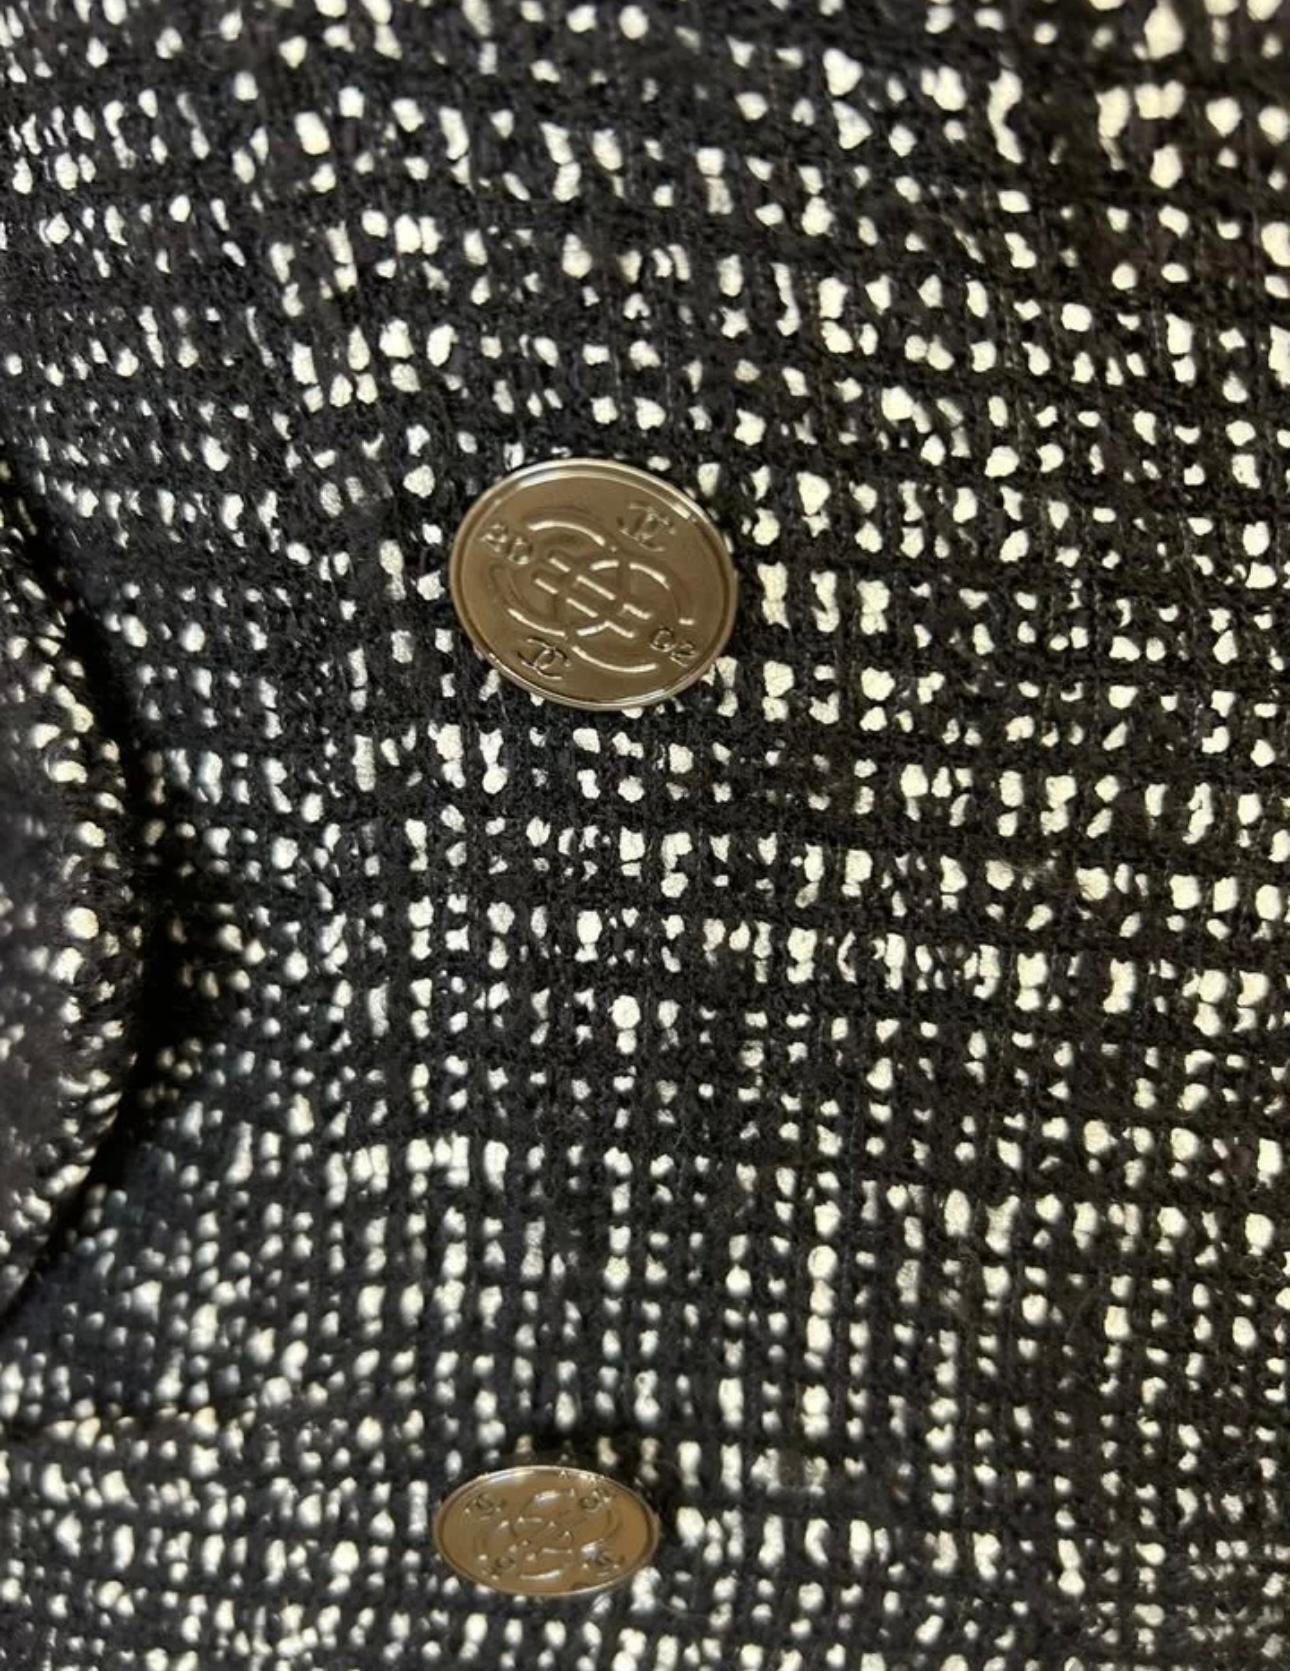 Chanel back tweed maxi coat from 2002 Fall Collection. A rare find!
- CC logo 'EURO / €' sign buttons
- tonal silk lining
Size mark 40 FR. Pristine condition.